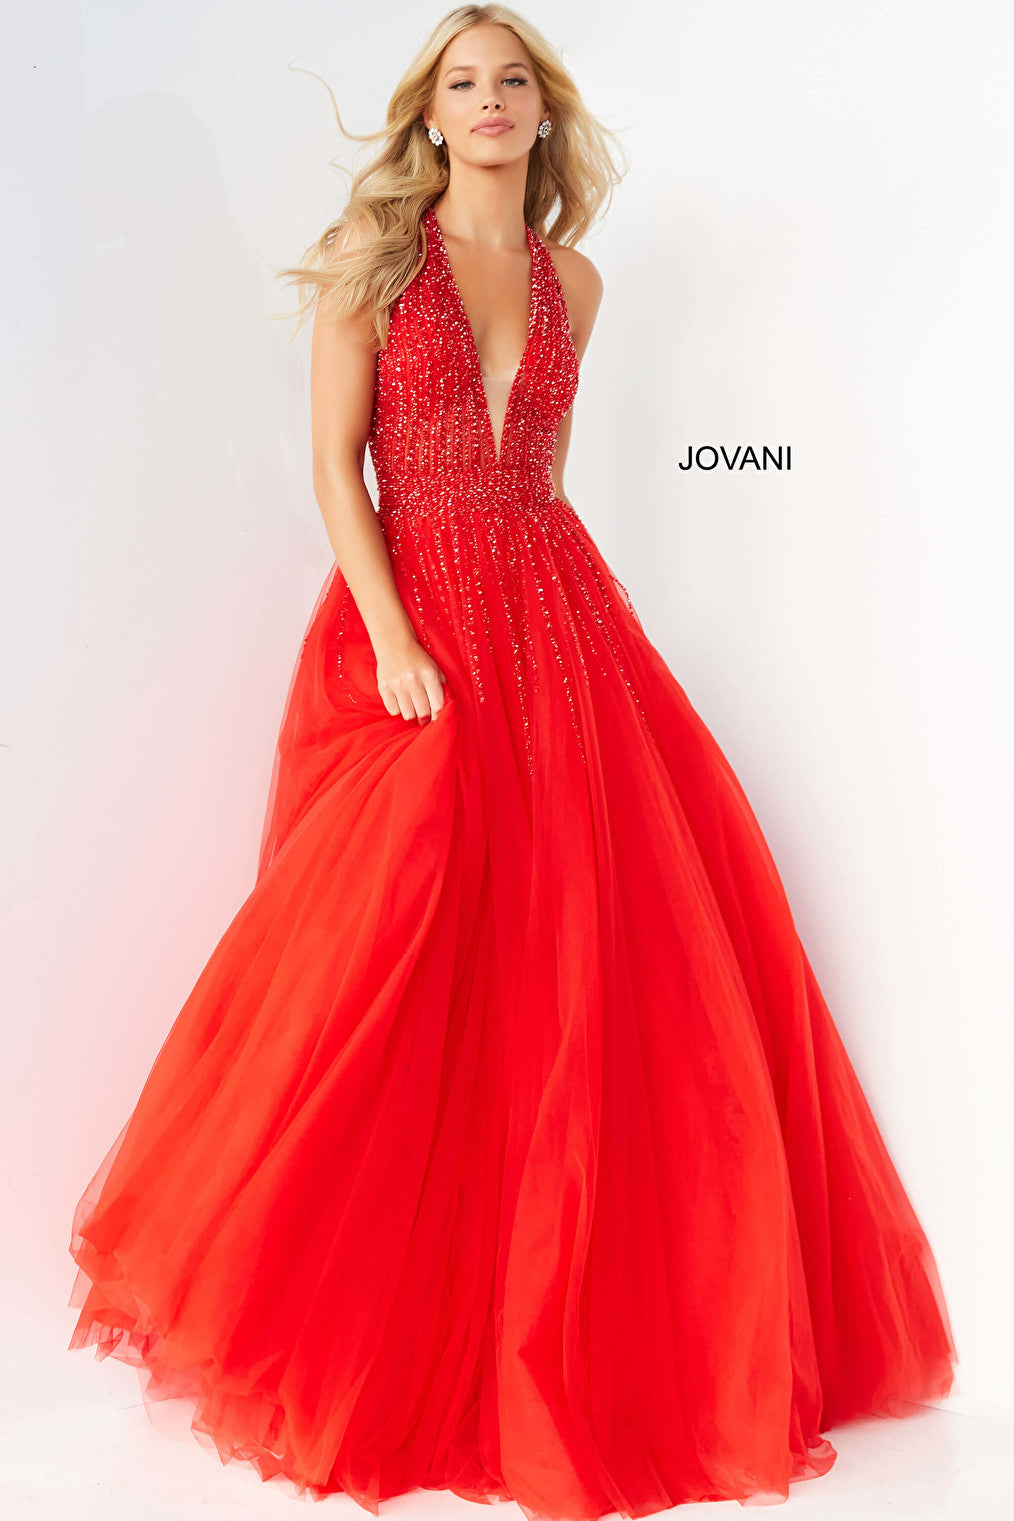 Plunging neck red prom ballgown 06598